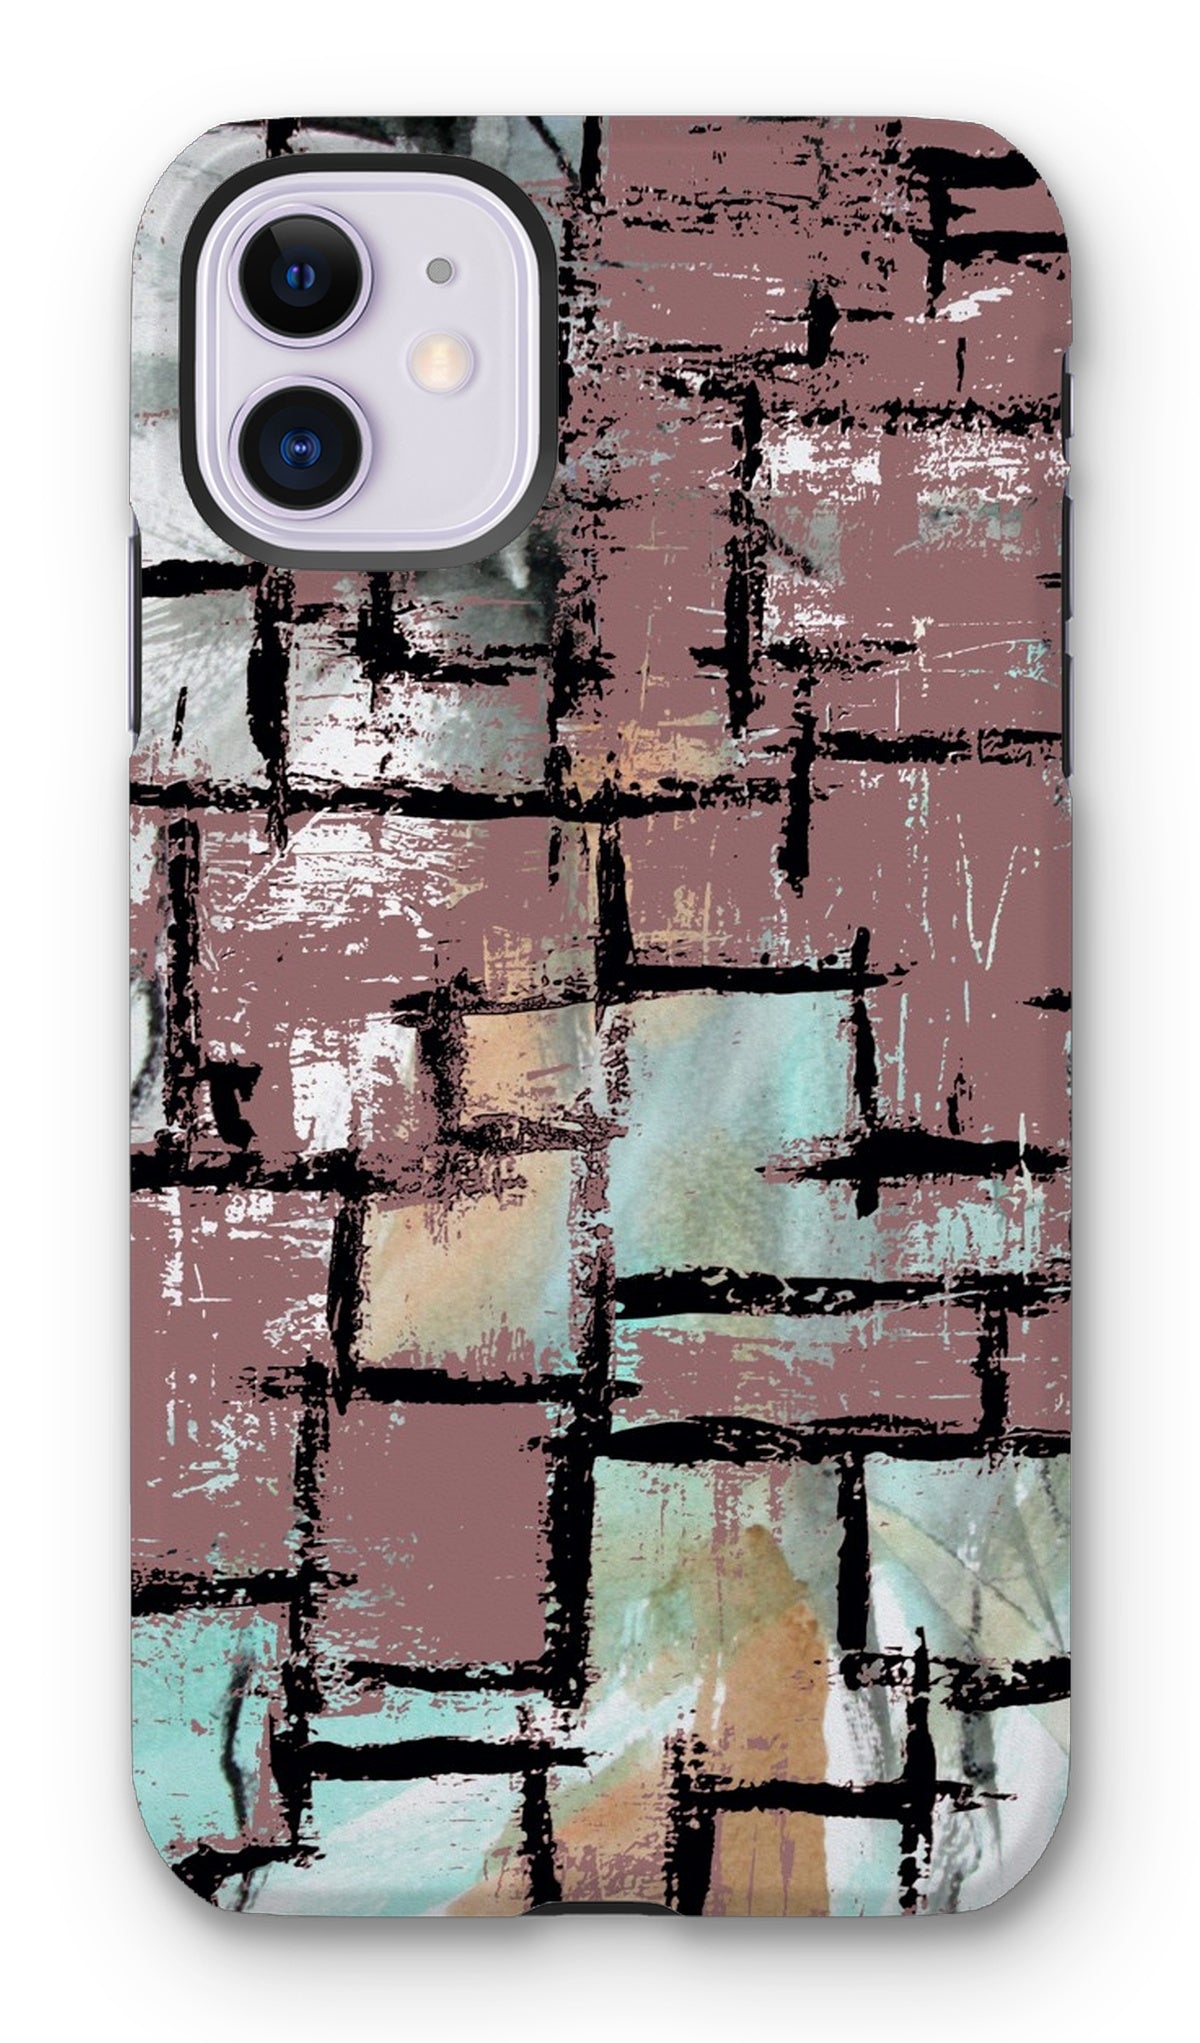 Trading Places I Phone Case